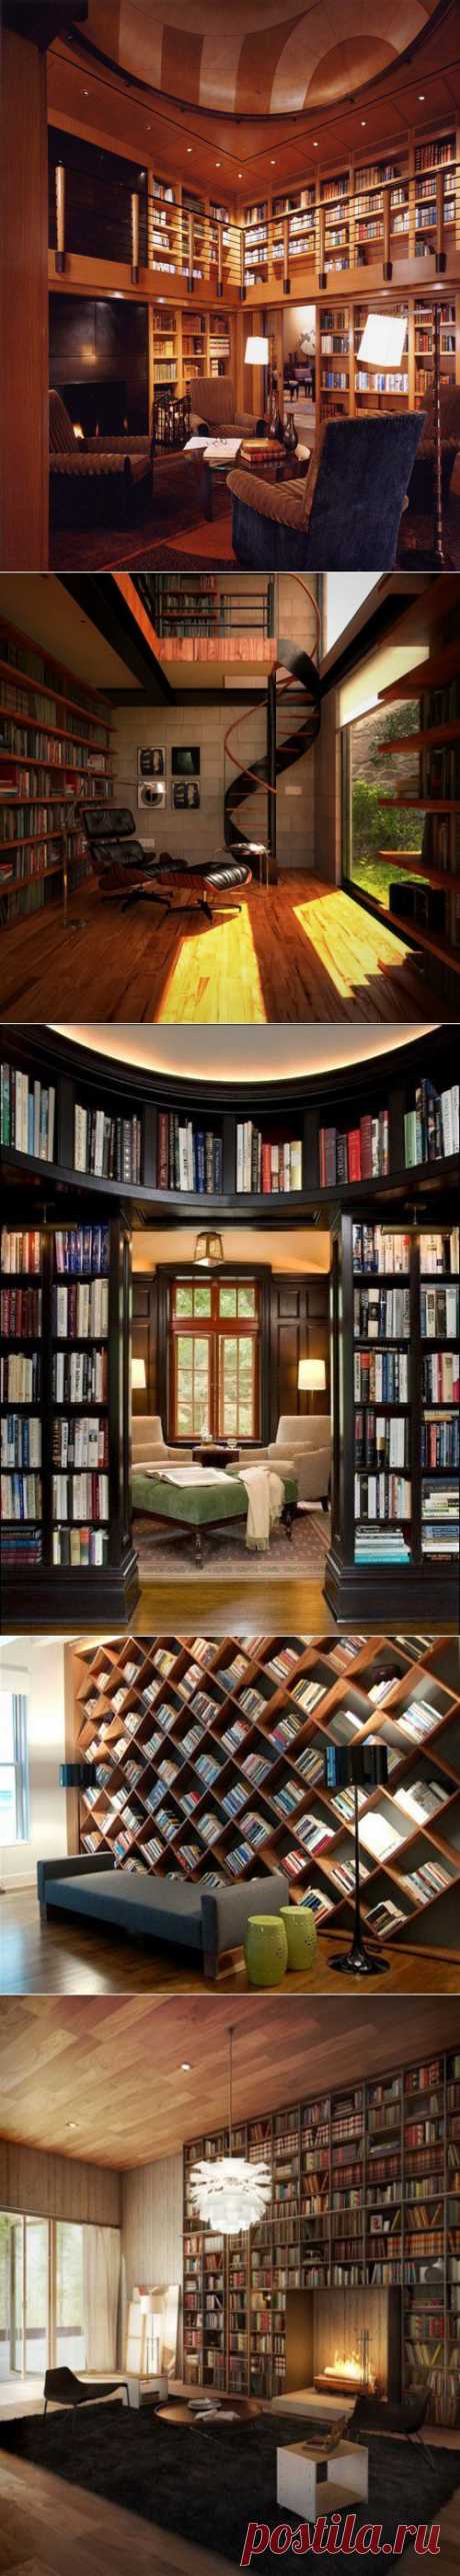 15 Inspirational Home Libraries